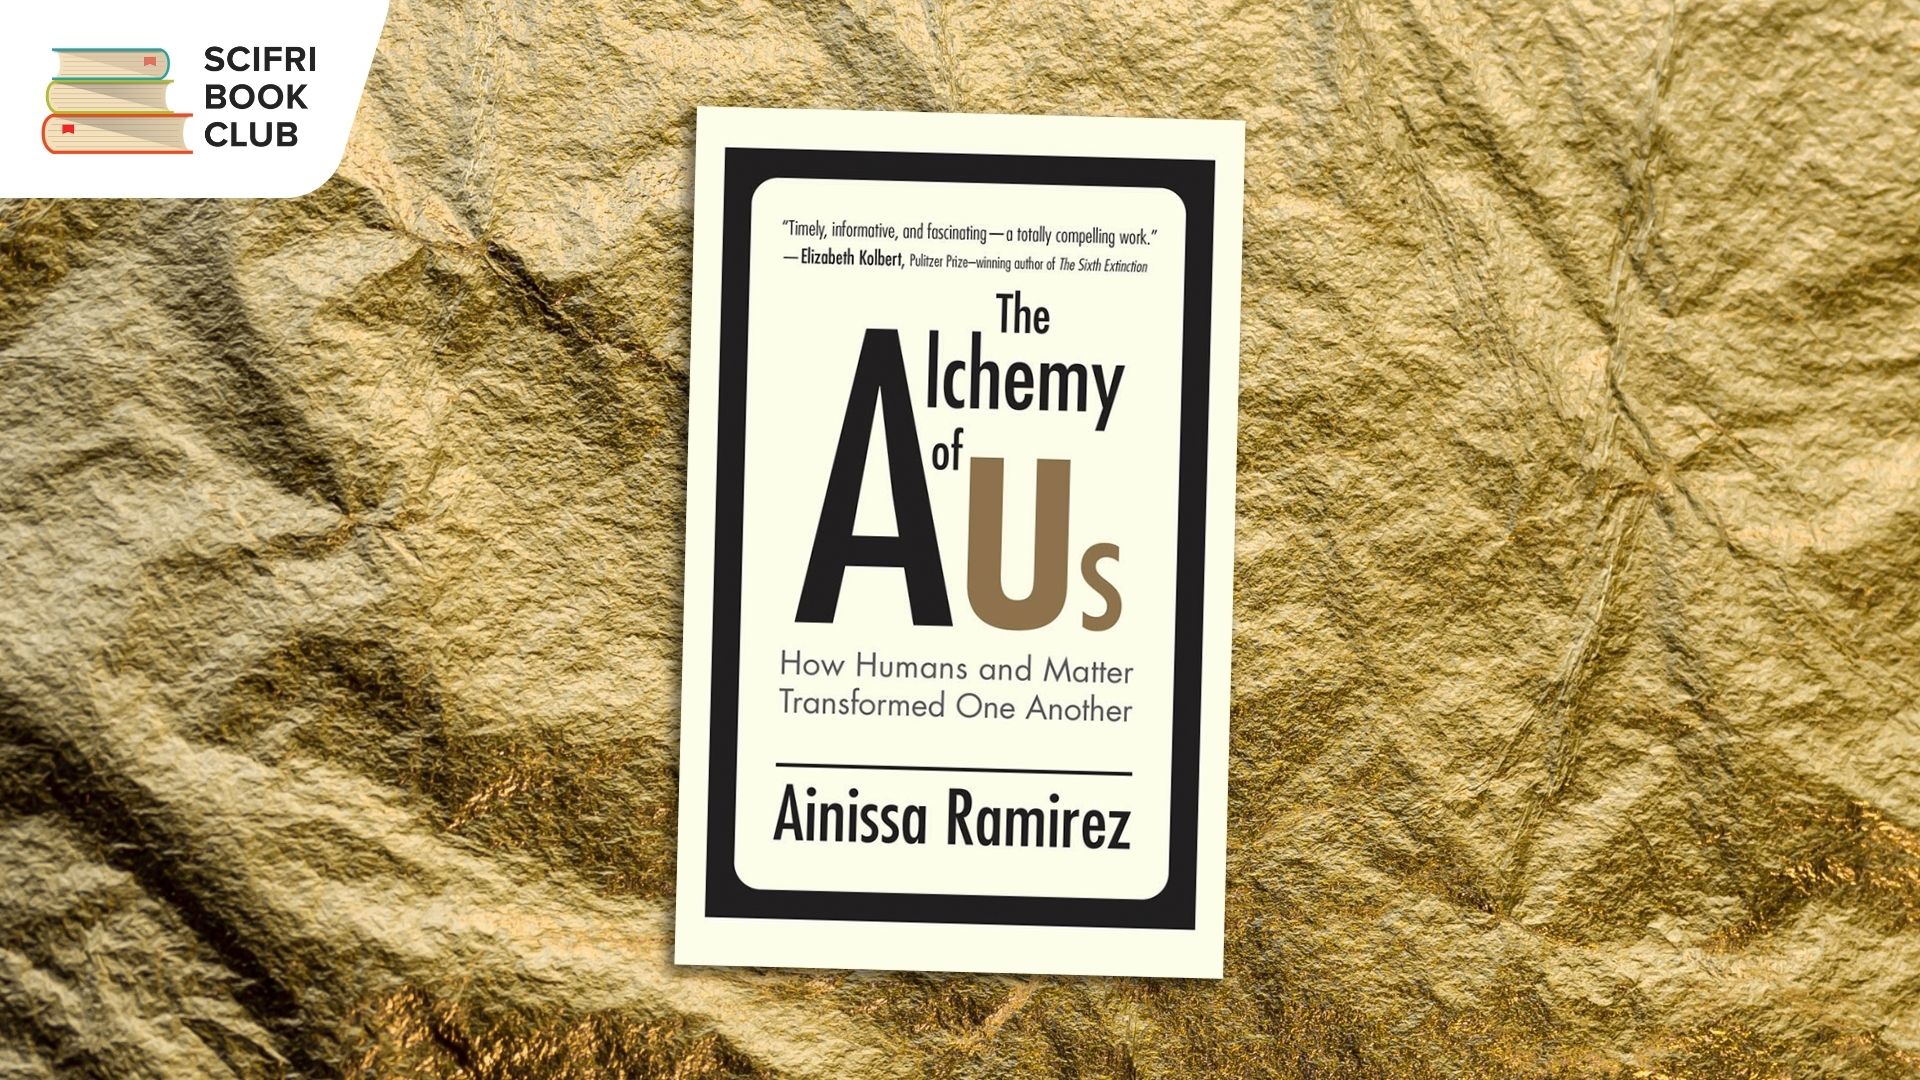 The book cover of THE ALCHEMY OF US by Ainissa Ramirez in the center, with a photo background featuring a gold crinkled paper texture. The logo for the SciFri Book Club in the top left corner.